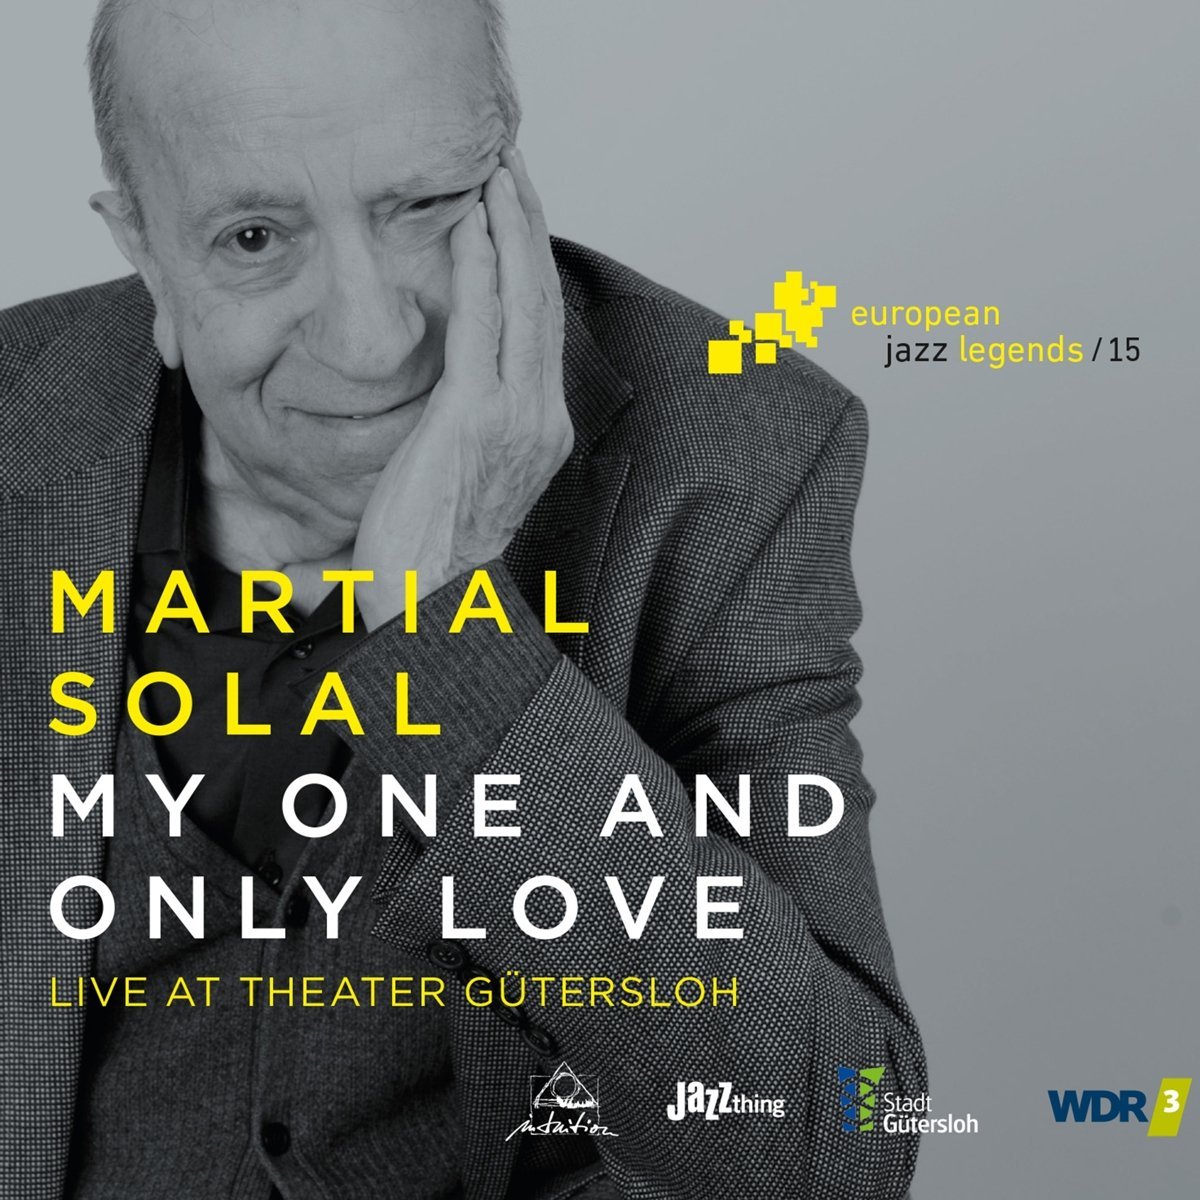 MARTIAL SOLAL - My One and Only Love cover 